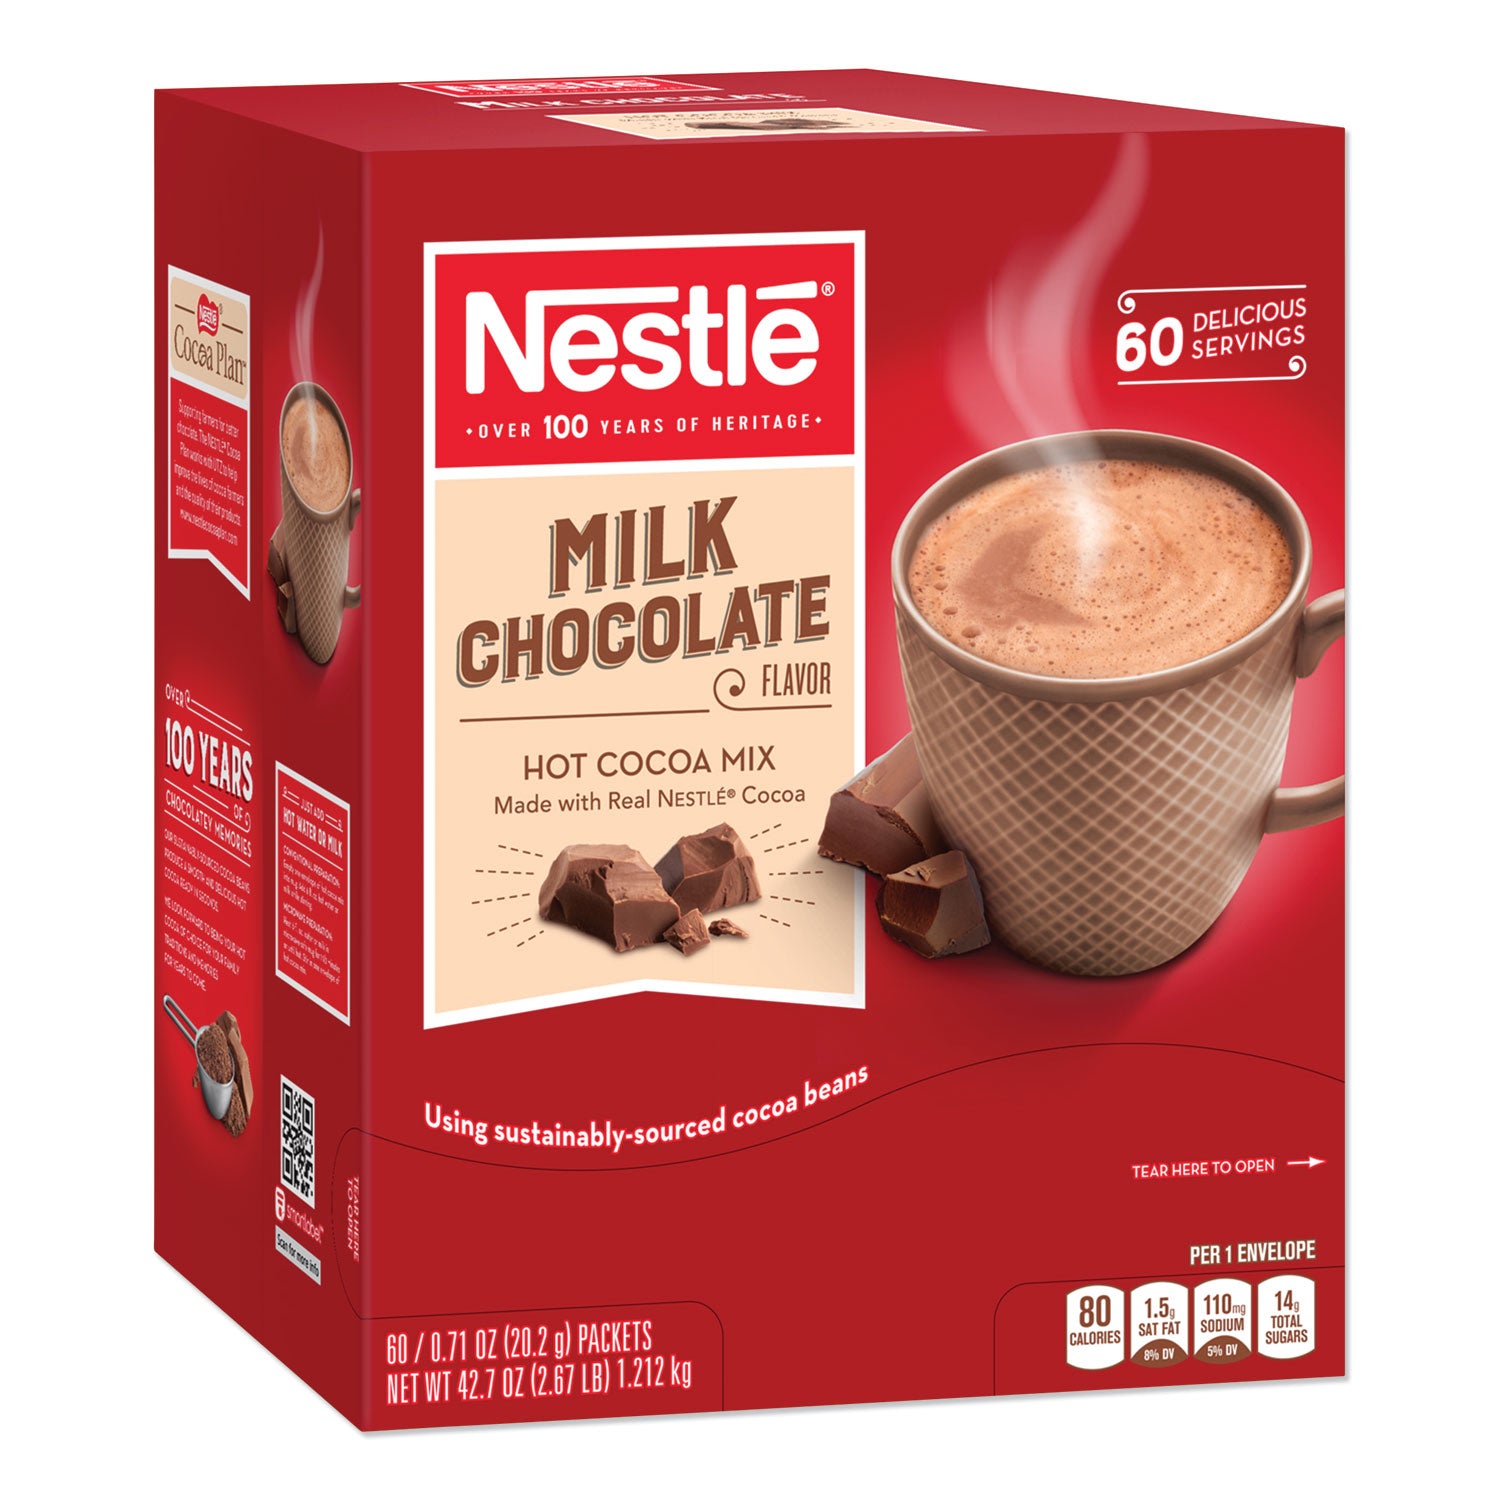 hot-cocoa-mix-milk-chocolate-071-oz-packet-60-packets-box_nes26791 - 1